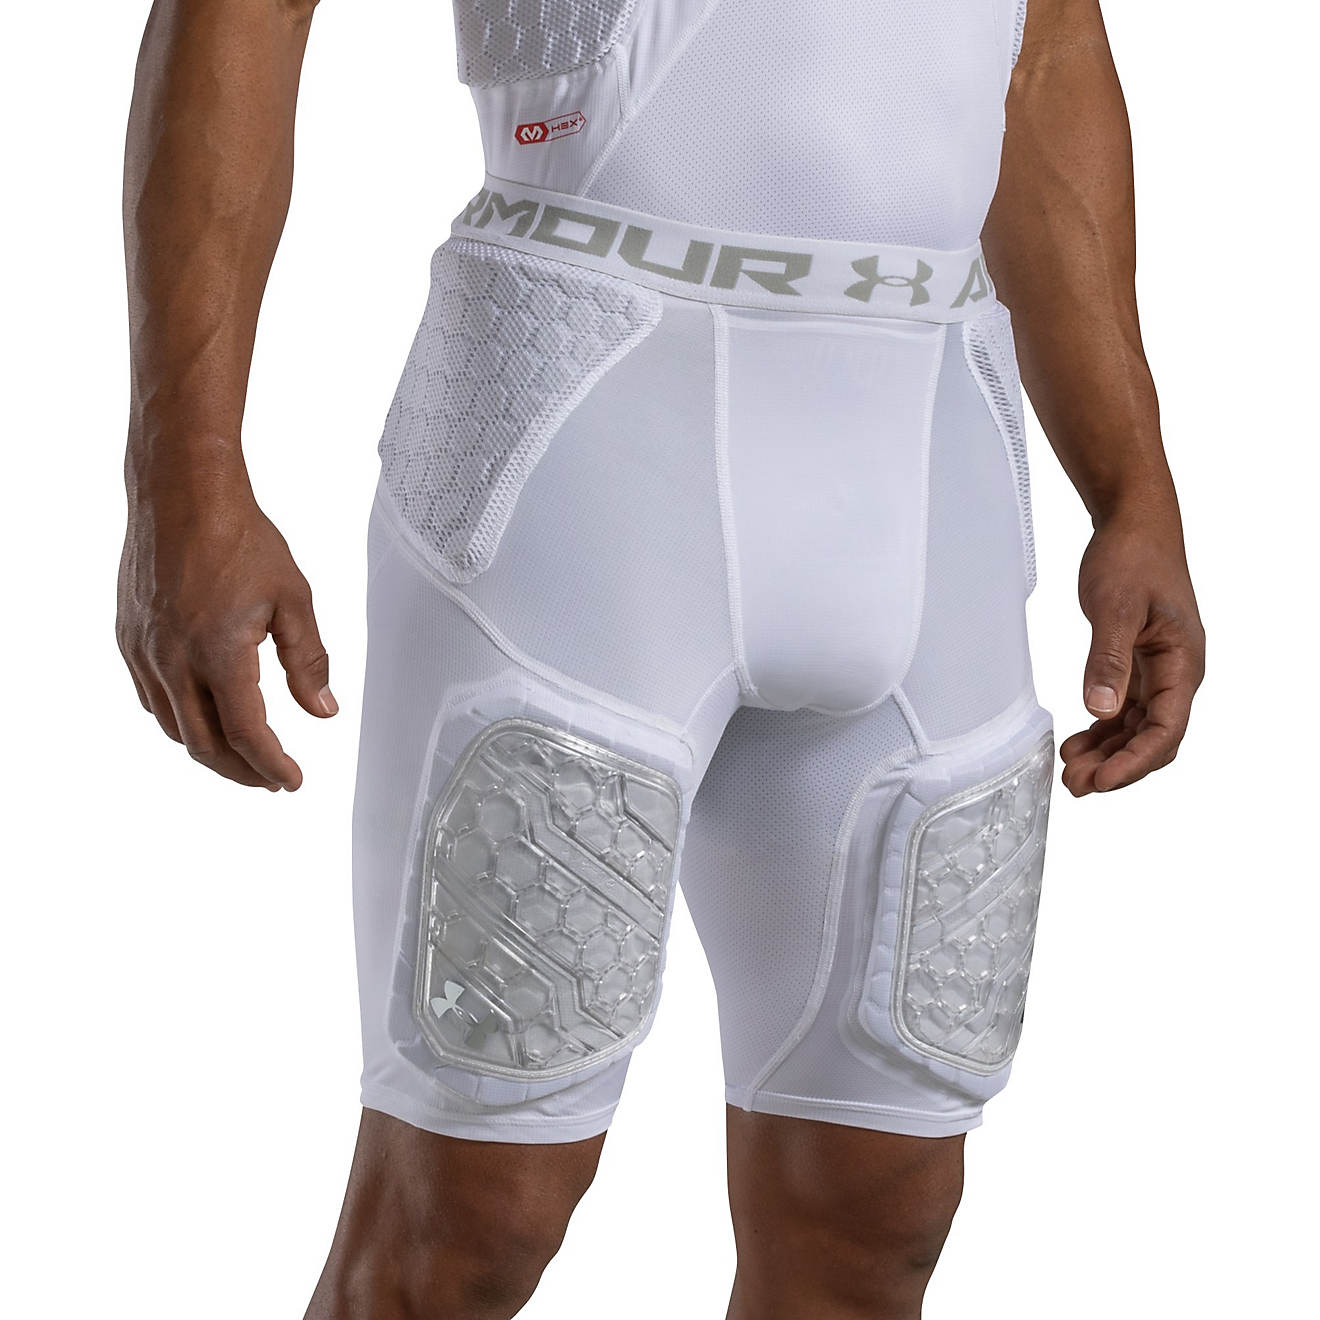 Under Armour Mens New Protective Girdle Pants 